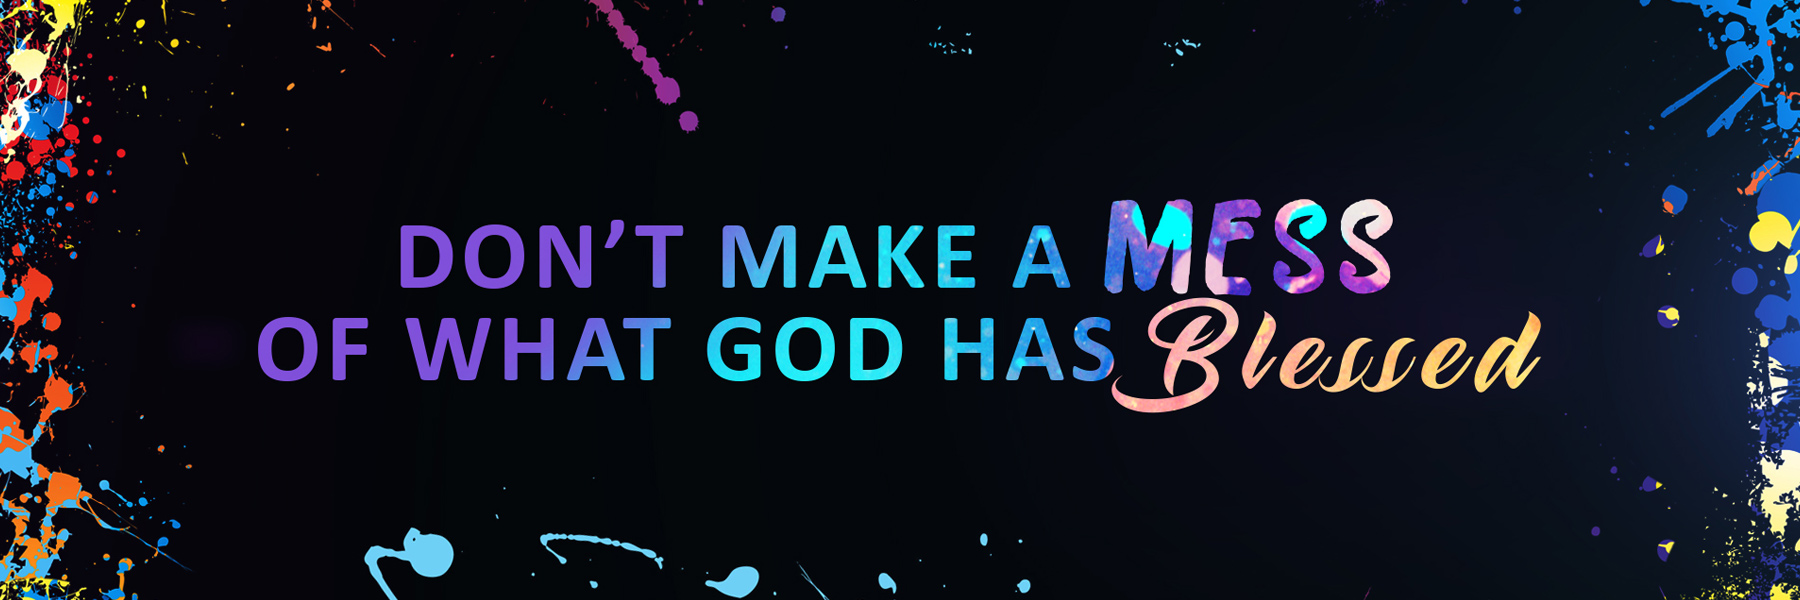 Don’t Make A Mess of What God Has Blessed